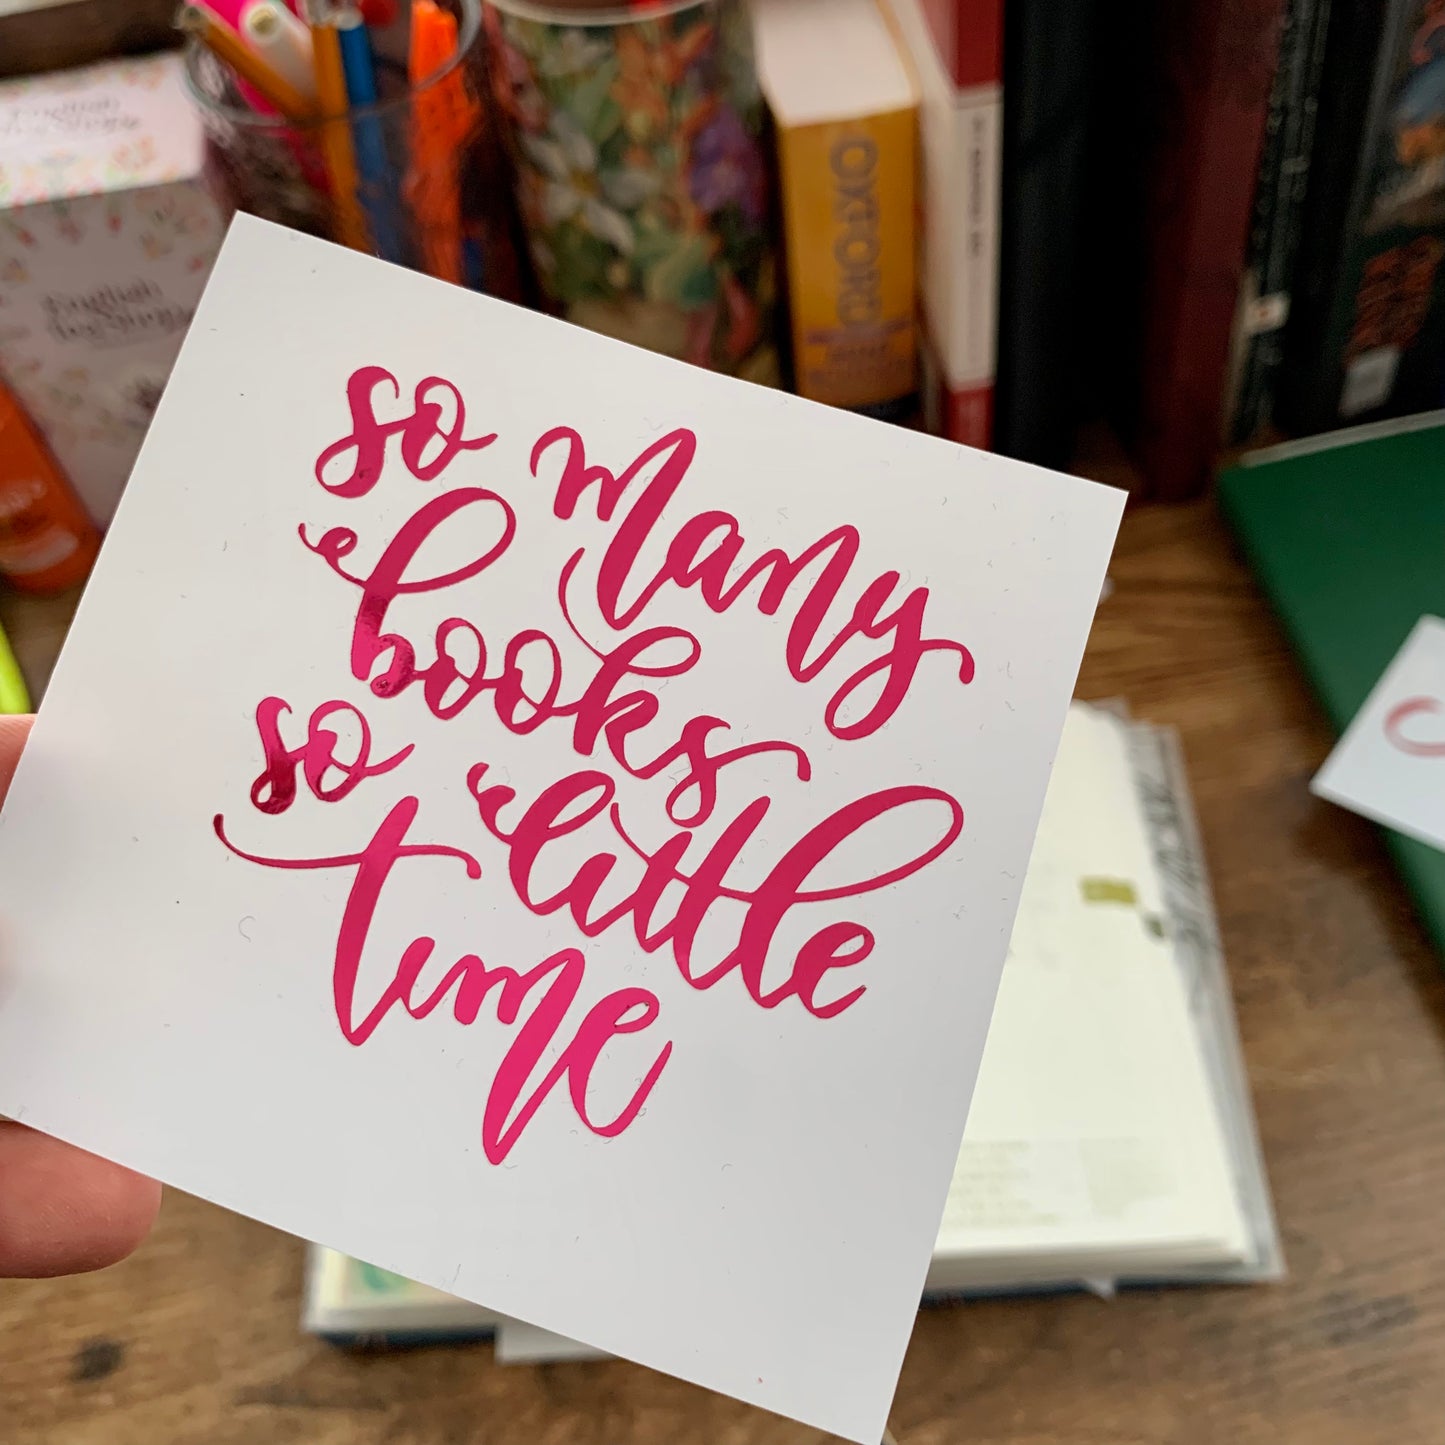 Book lover Quote Vinyl Sticker - So many books, so little time